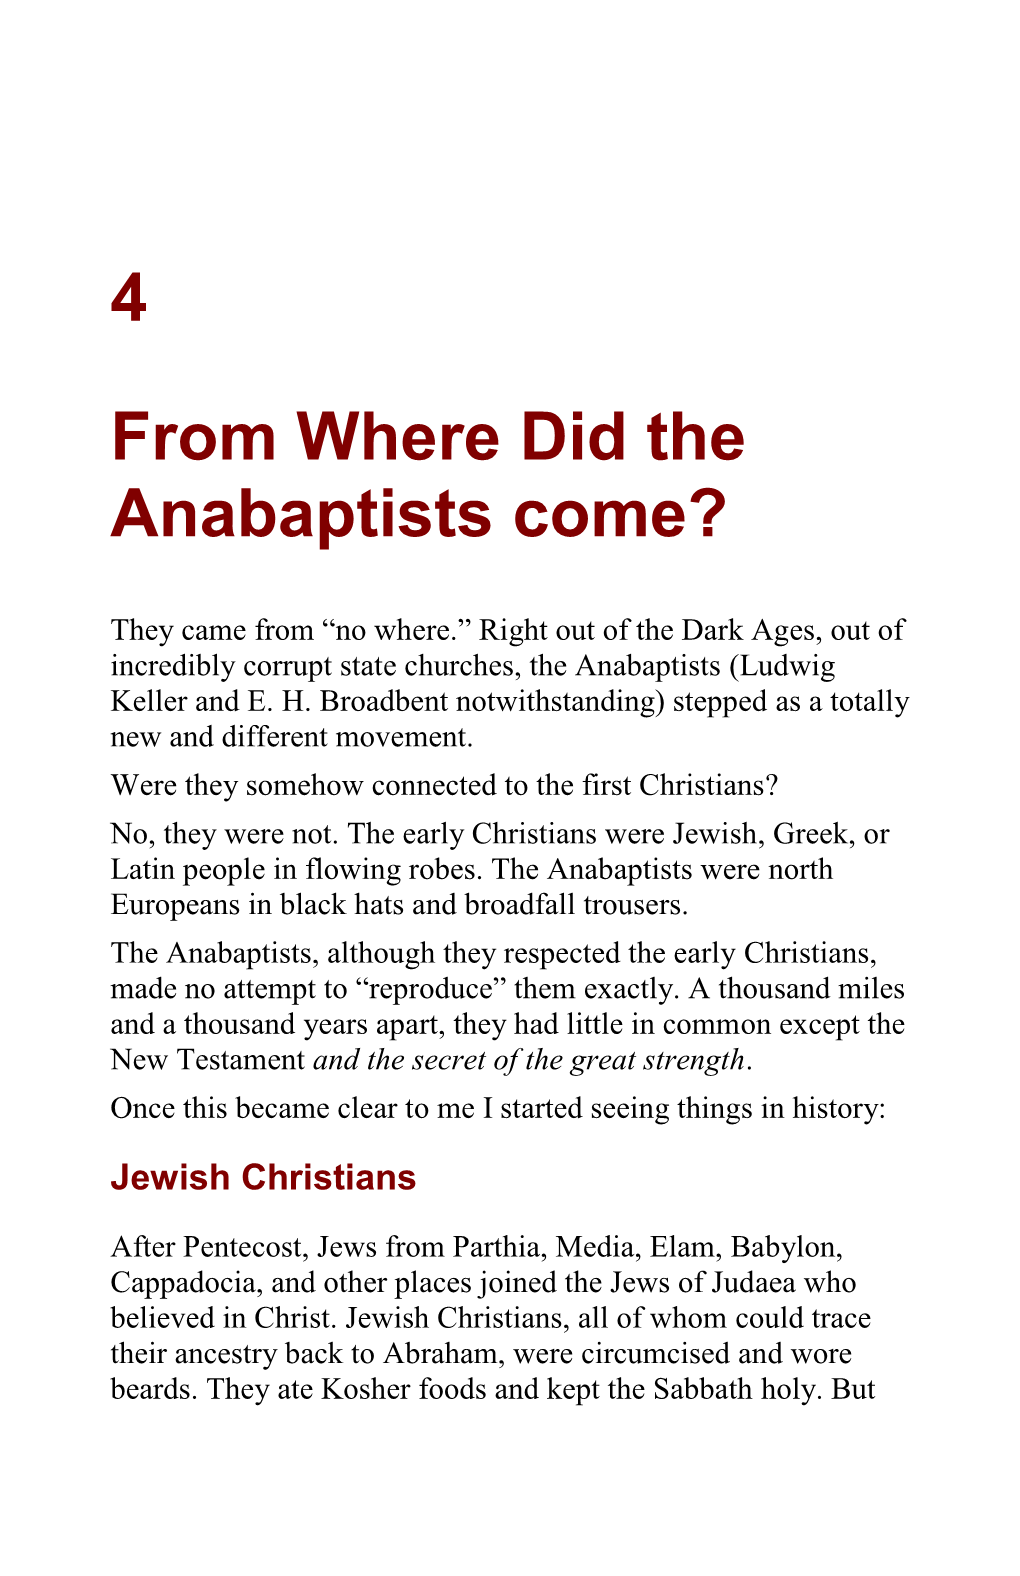 4 from Where Did the Anabaptists Come